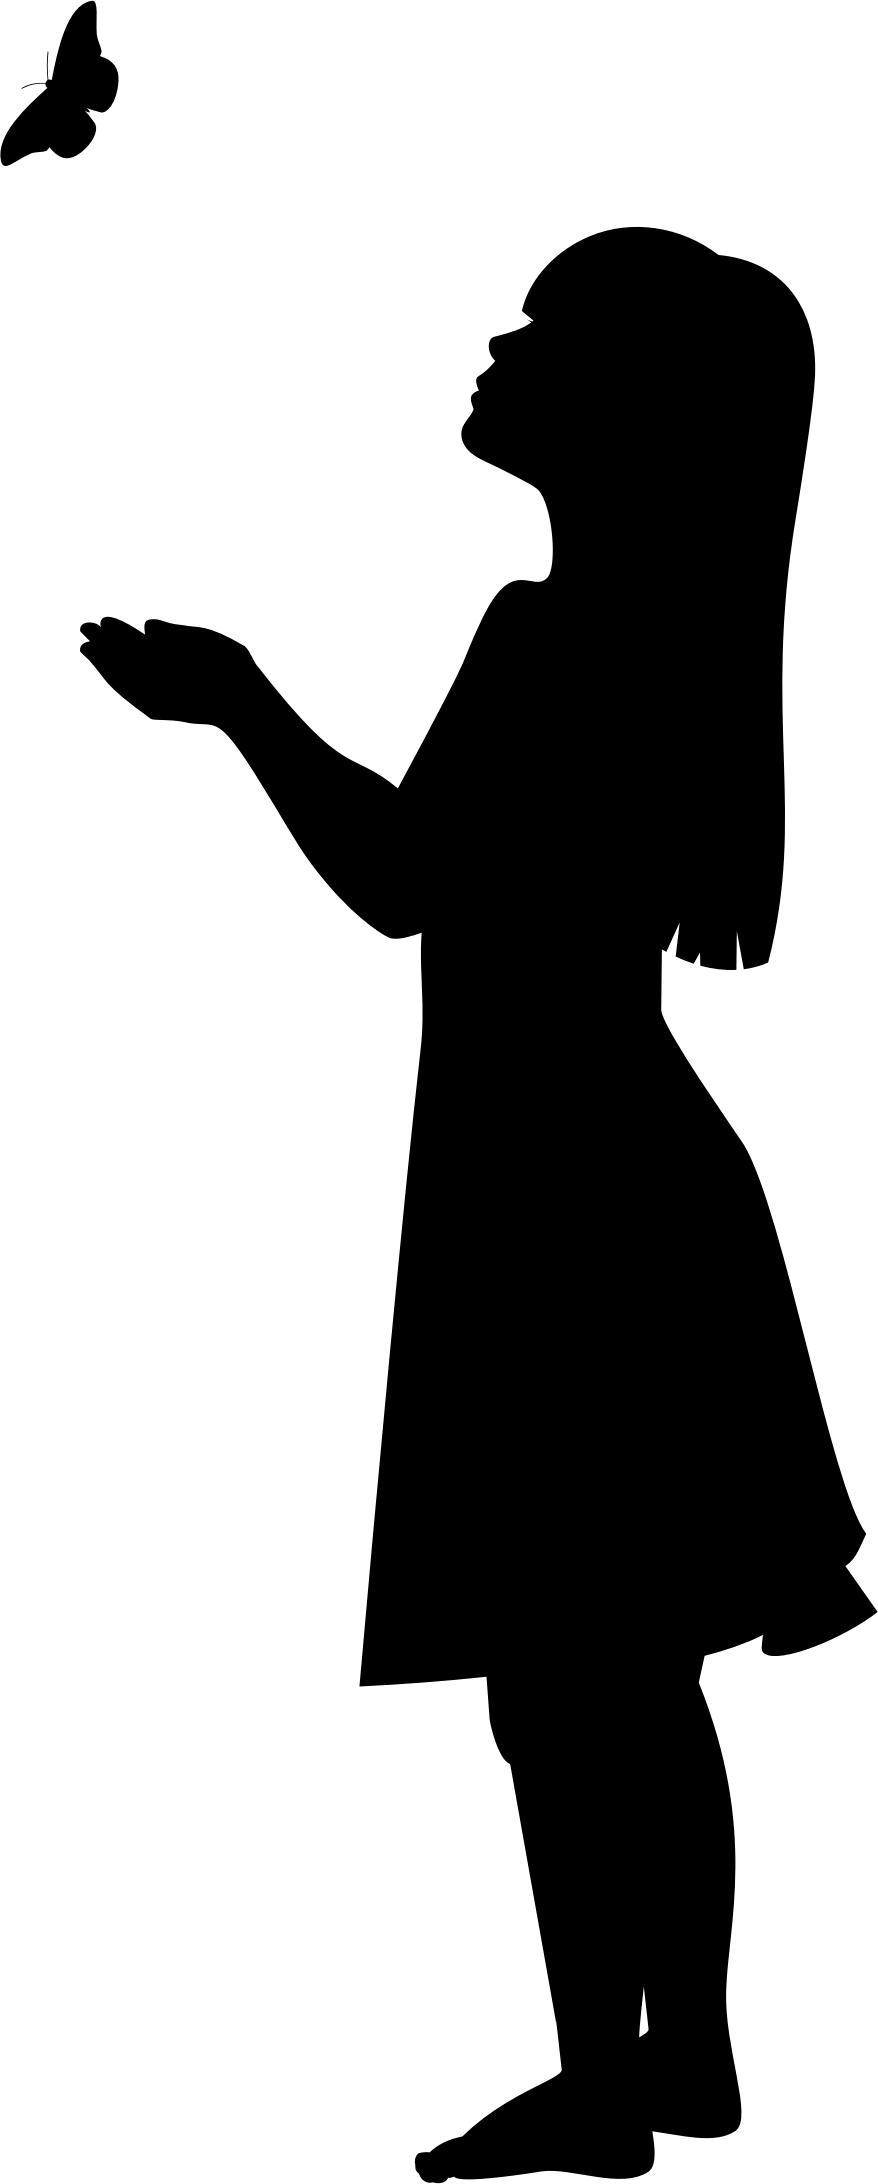 Little Girl And Butterfly Silhouette png transparent